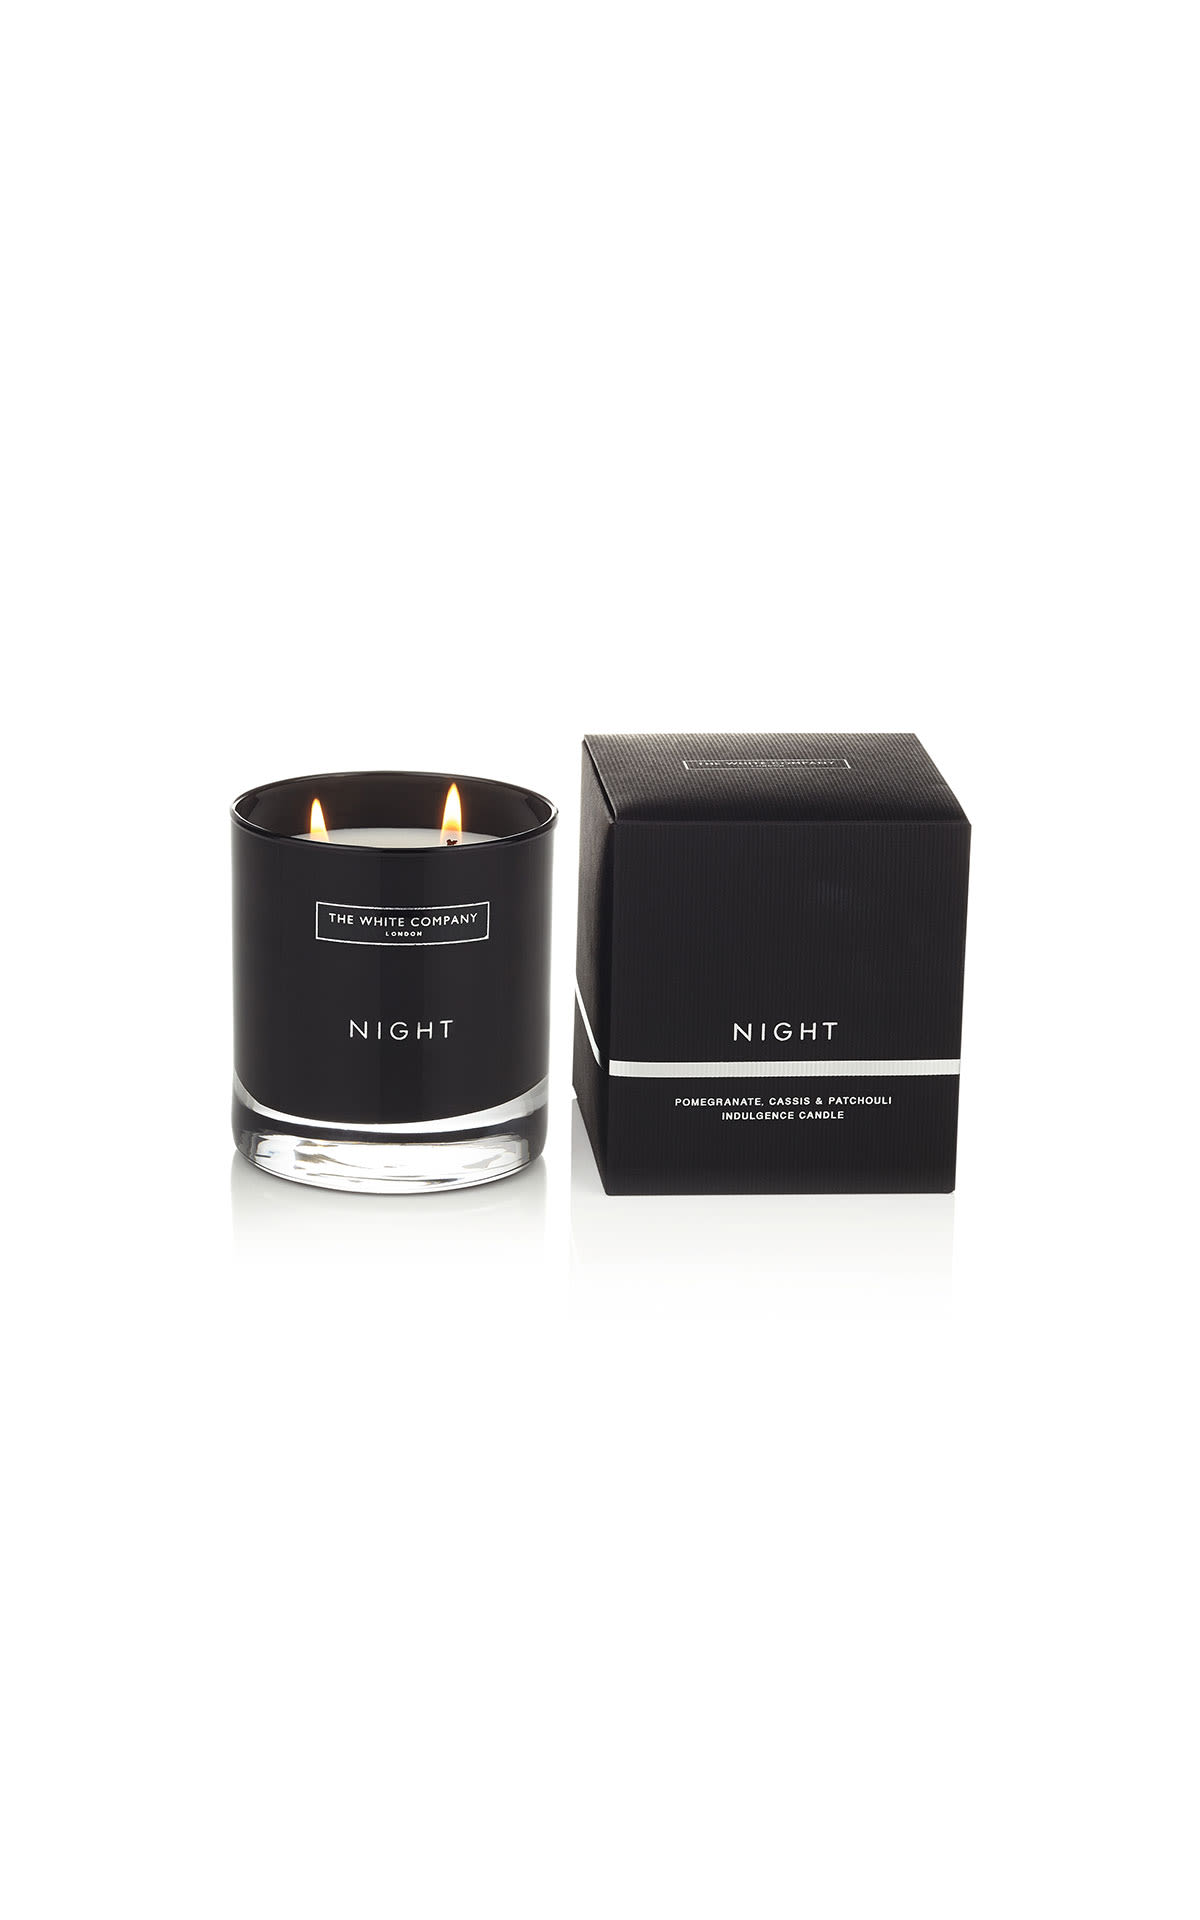 The White Company Night two wick candle from Bicester Village